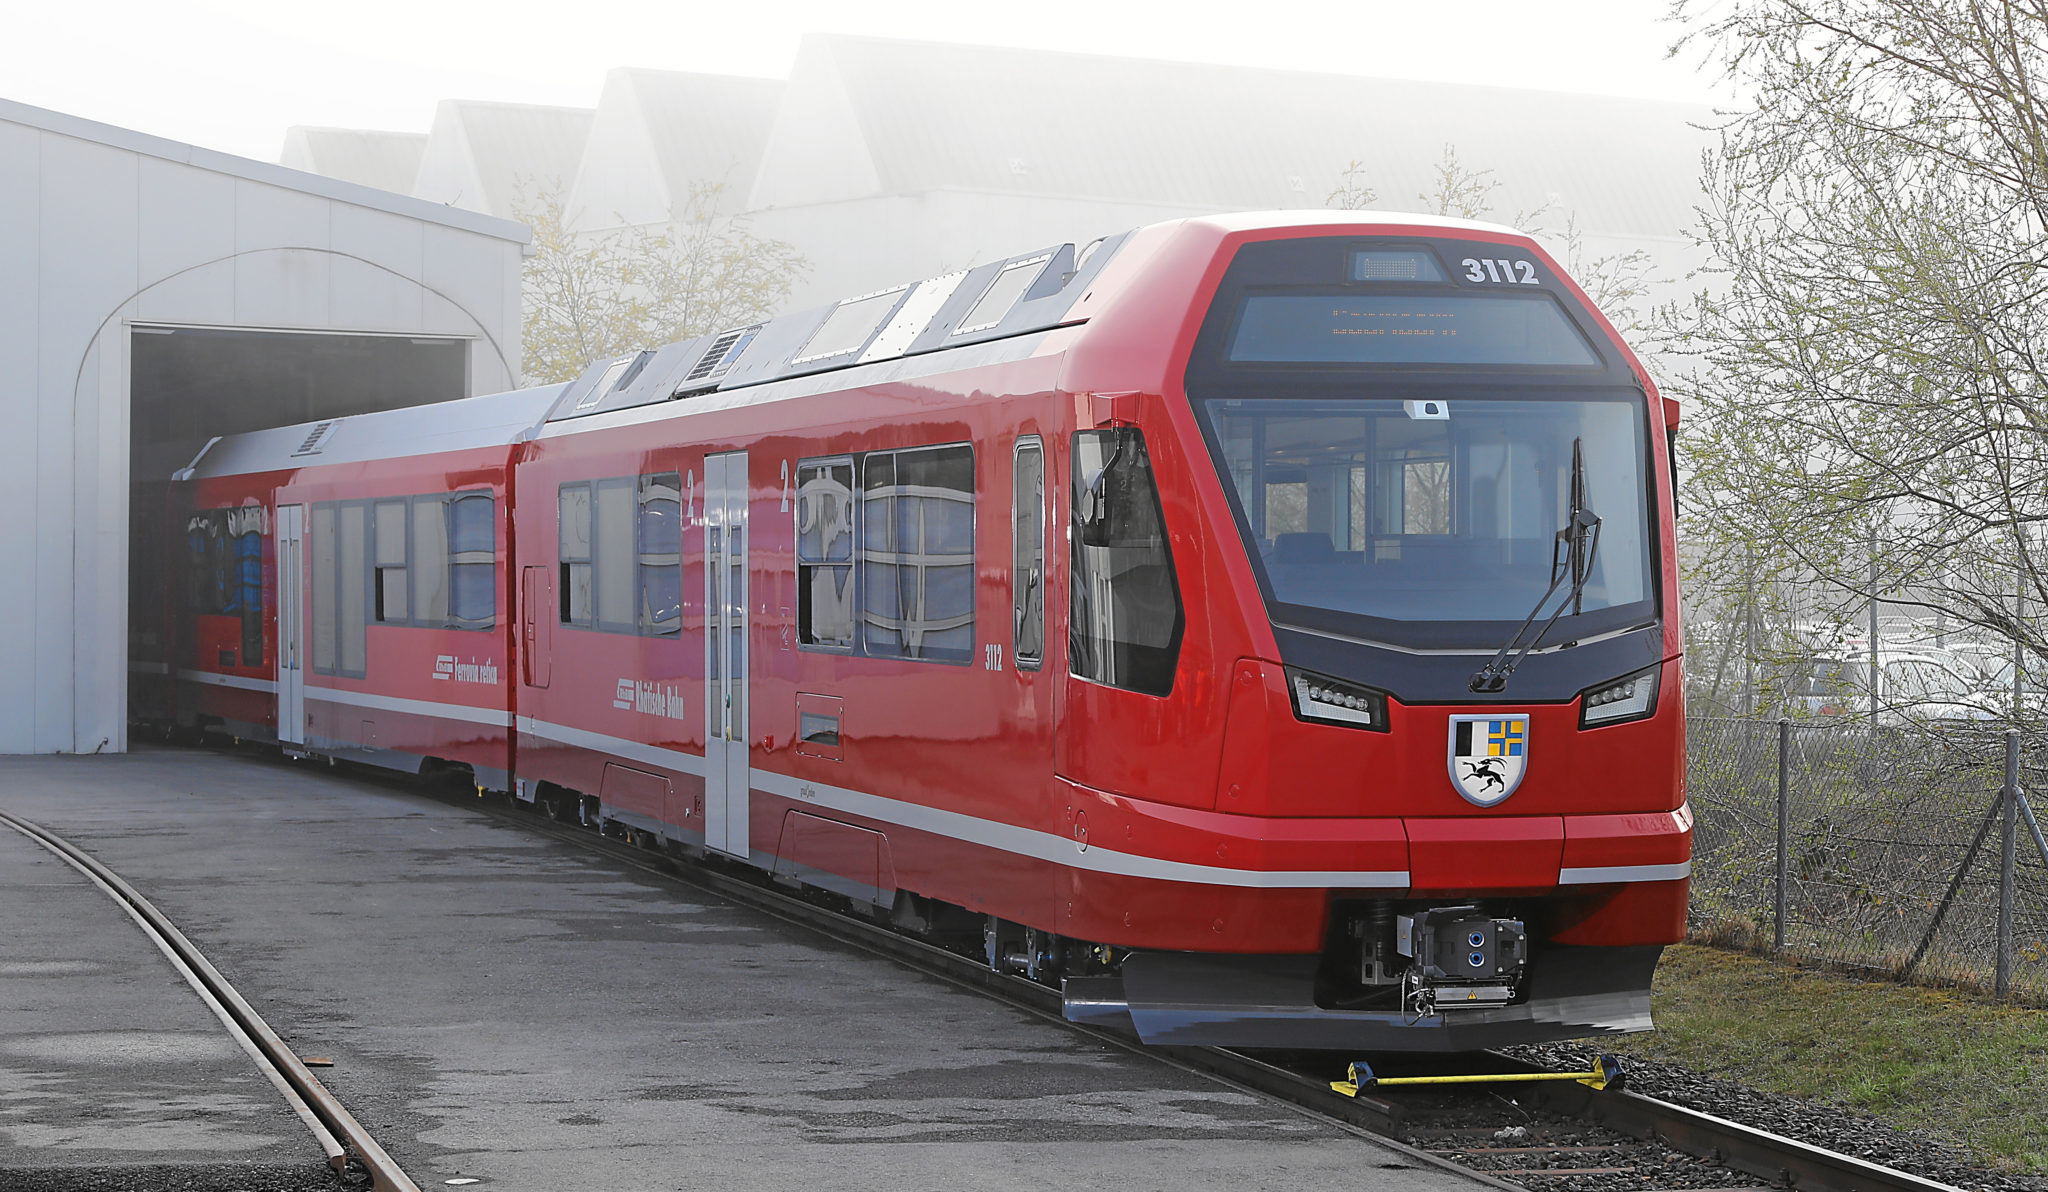 The roll-out of the new Stadler Capricorn train for Rhaetian Railway